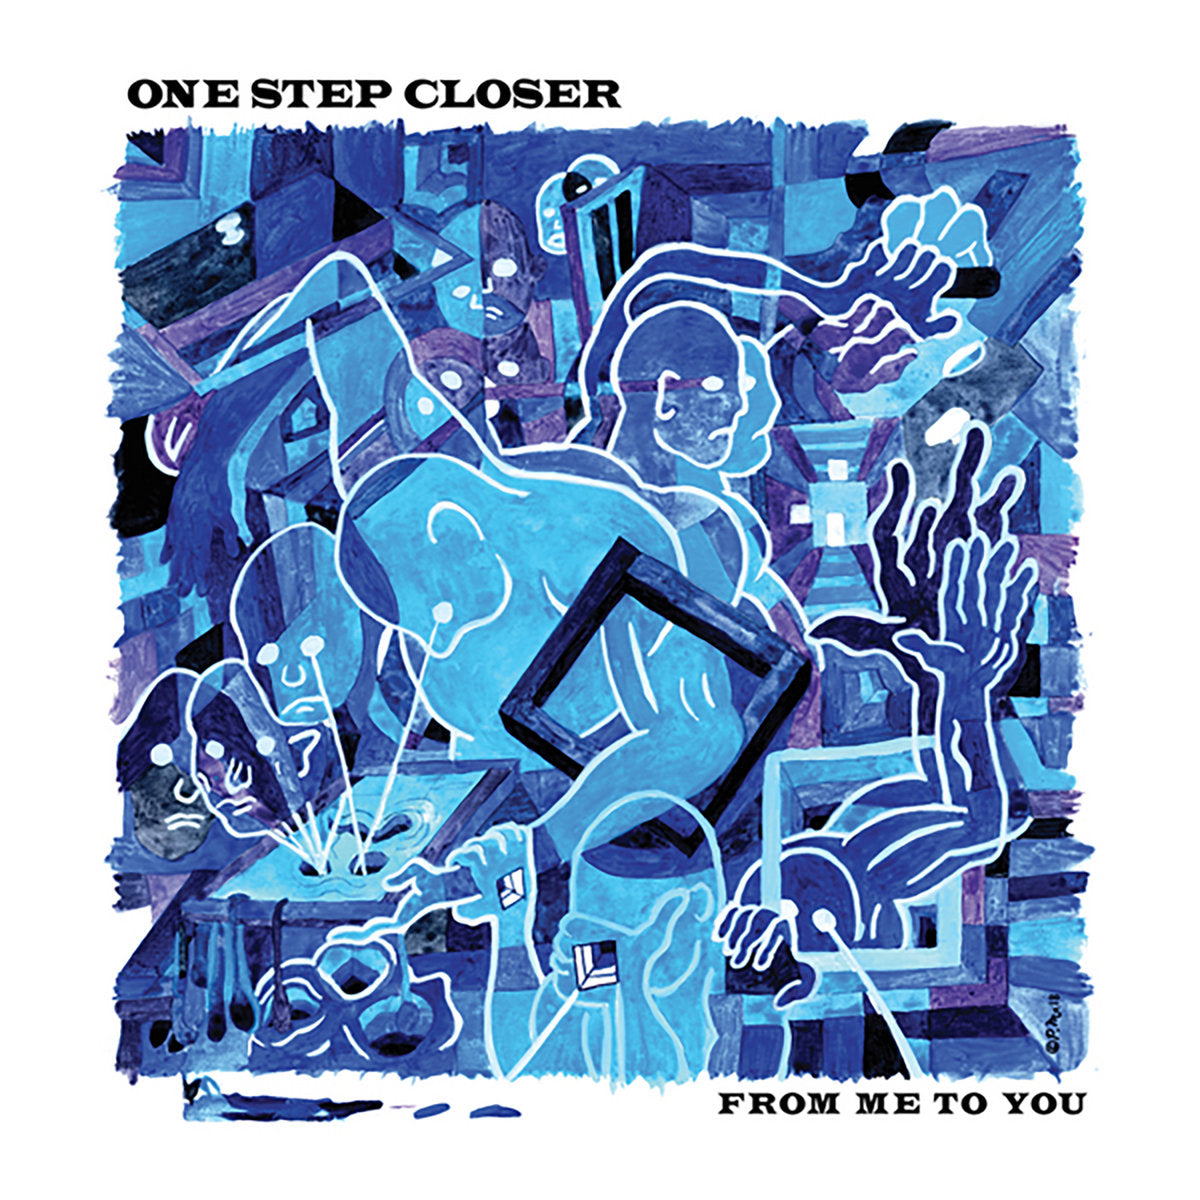 One Step Closer  "From Me To You" LP